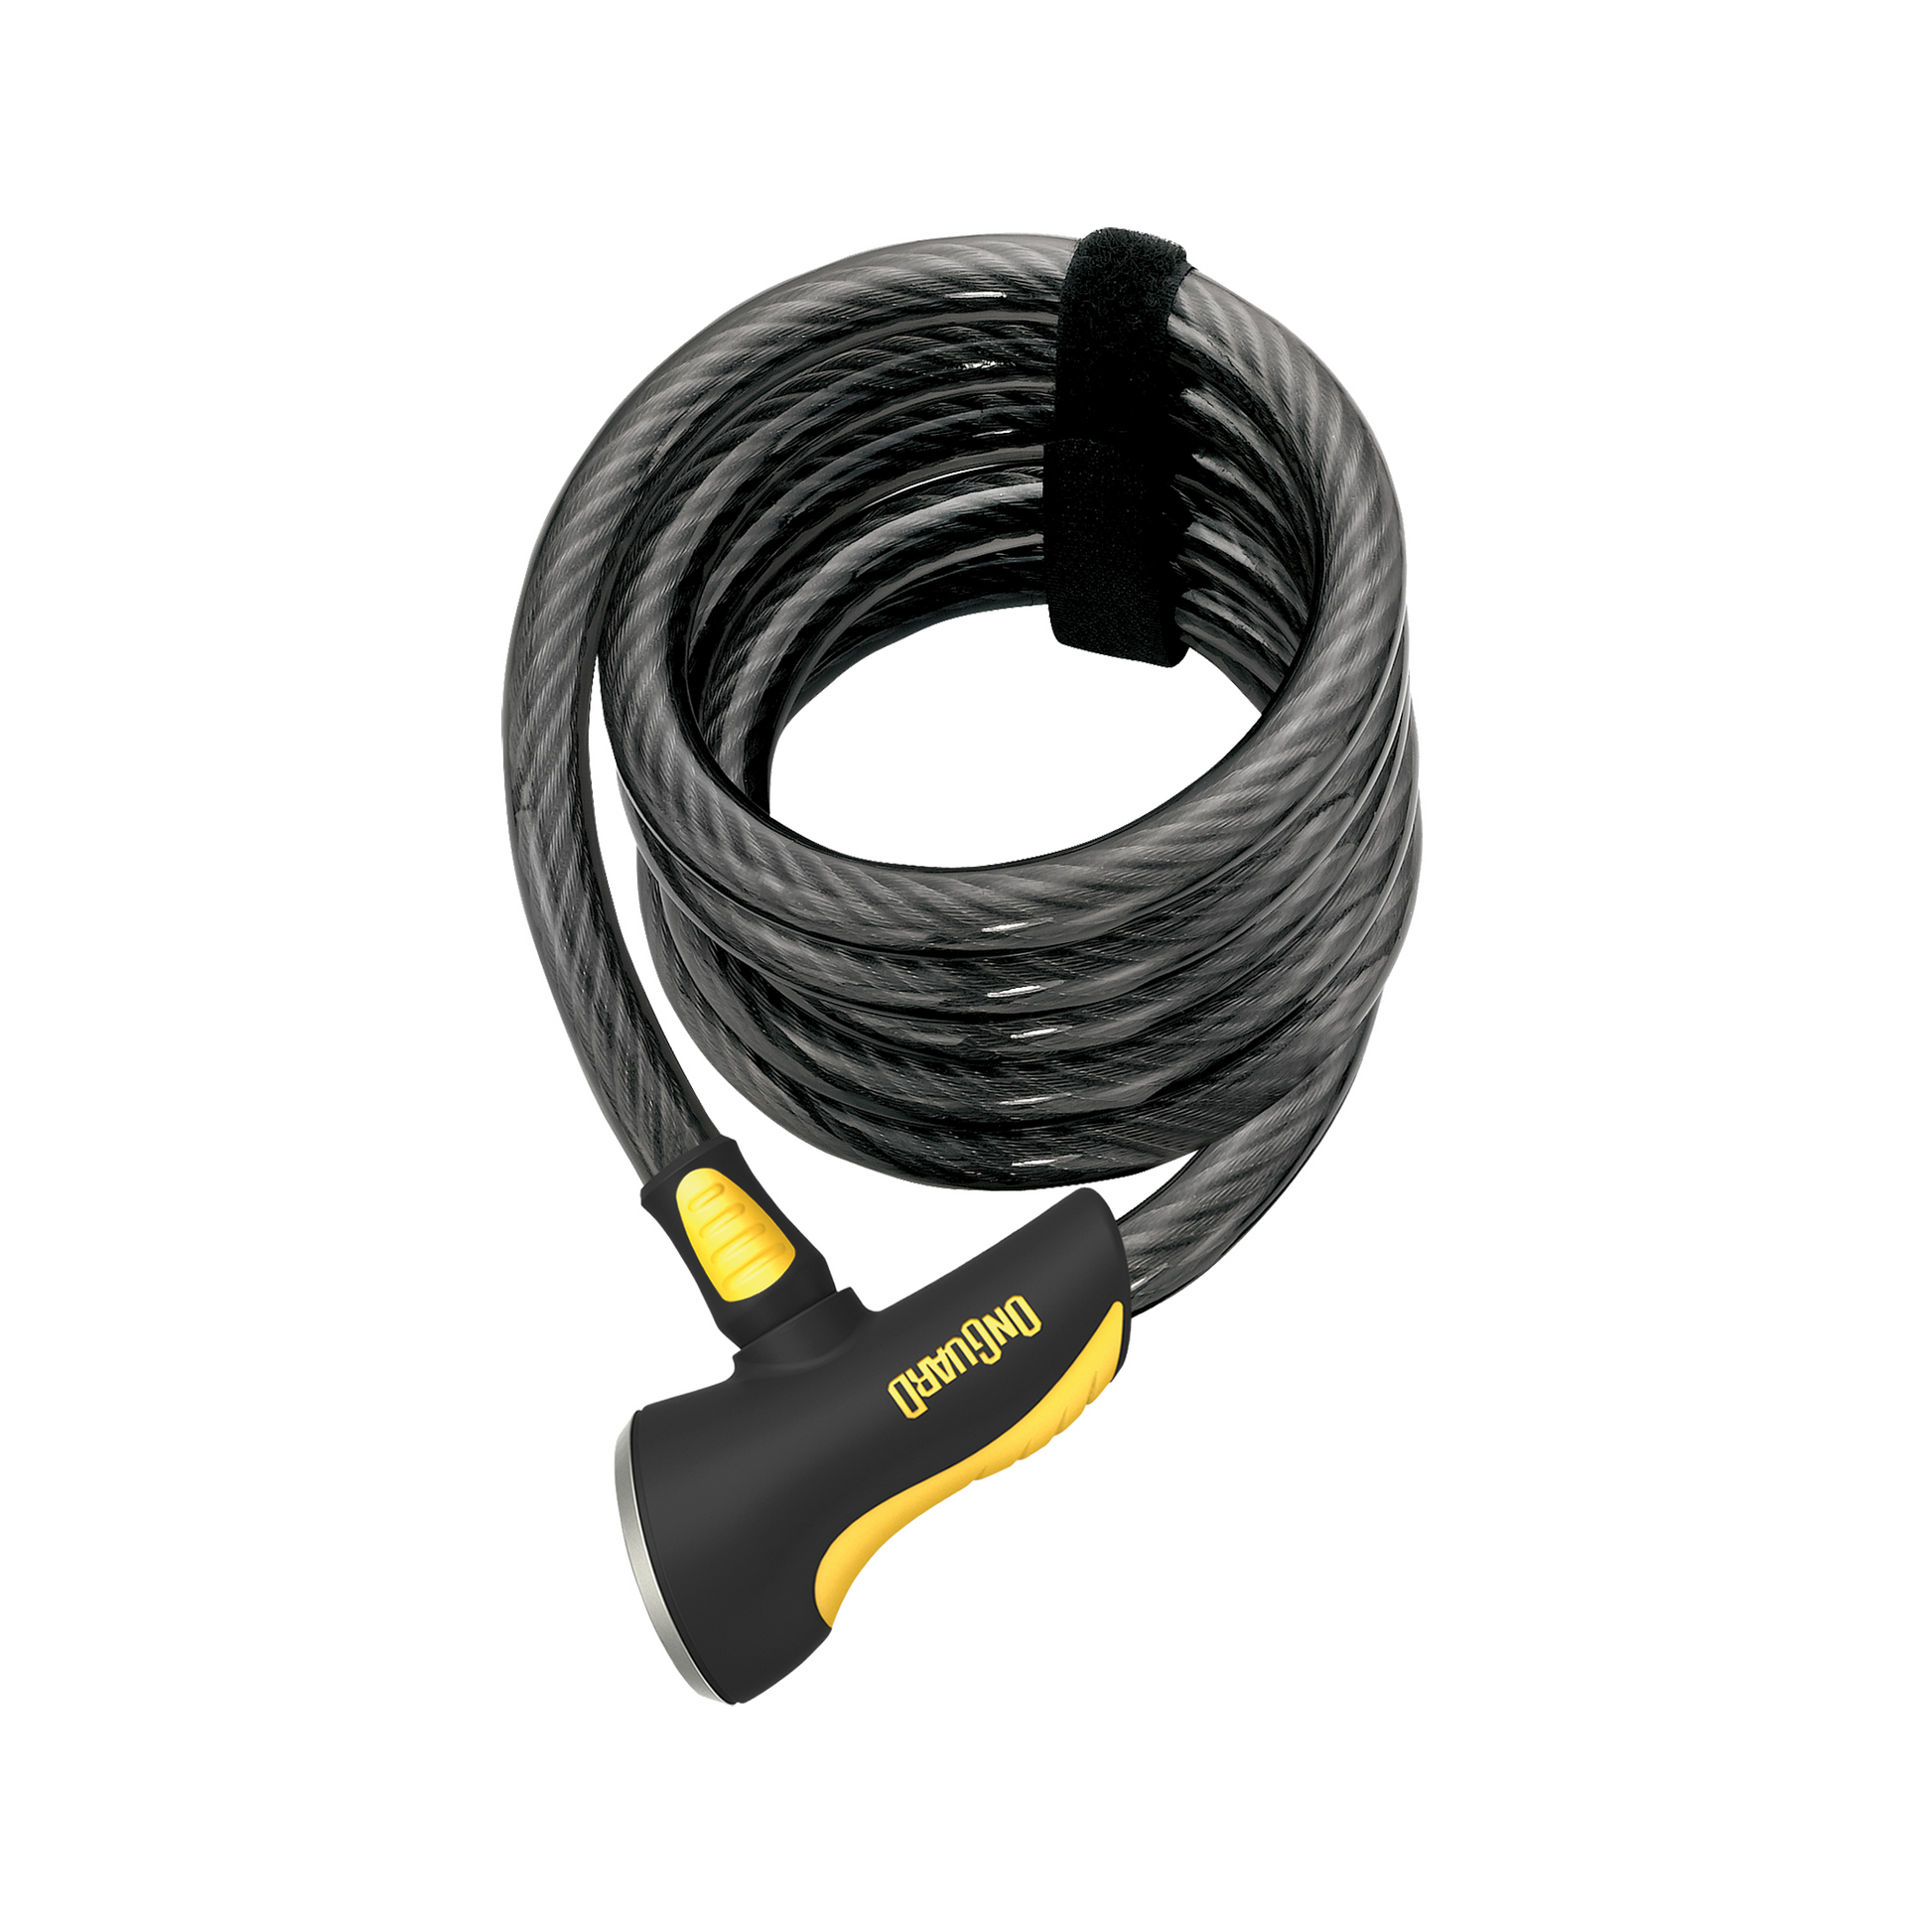 A heavy duty ONGUARD Doberman 8028 keyed cable with a strong yellow handle.